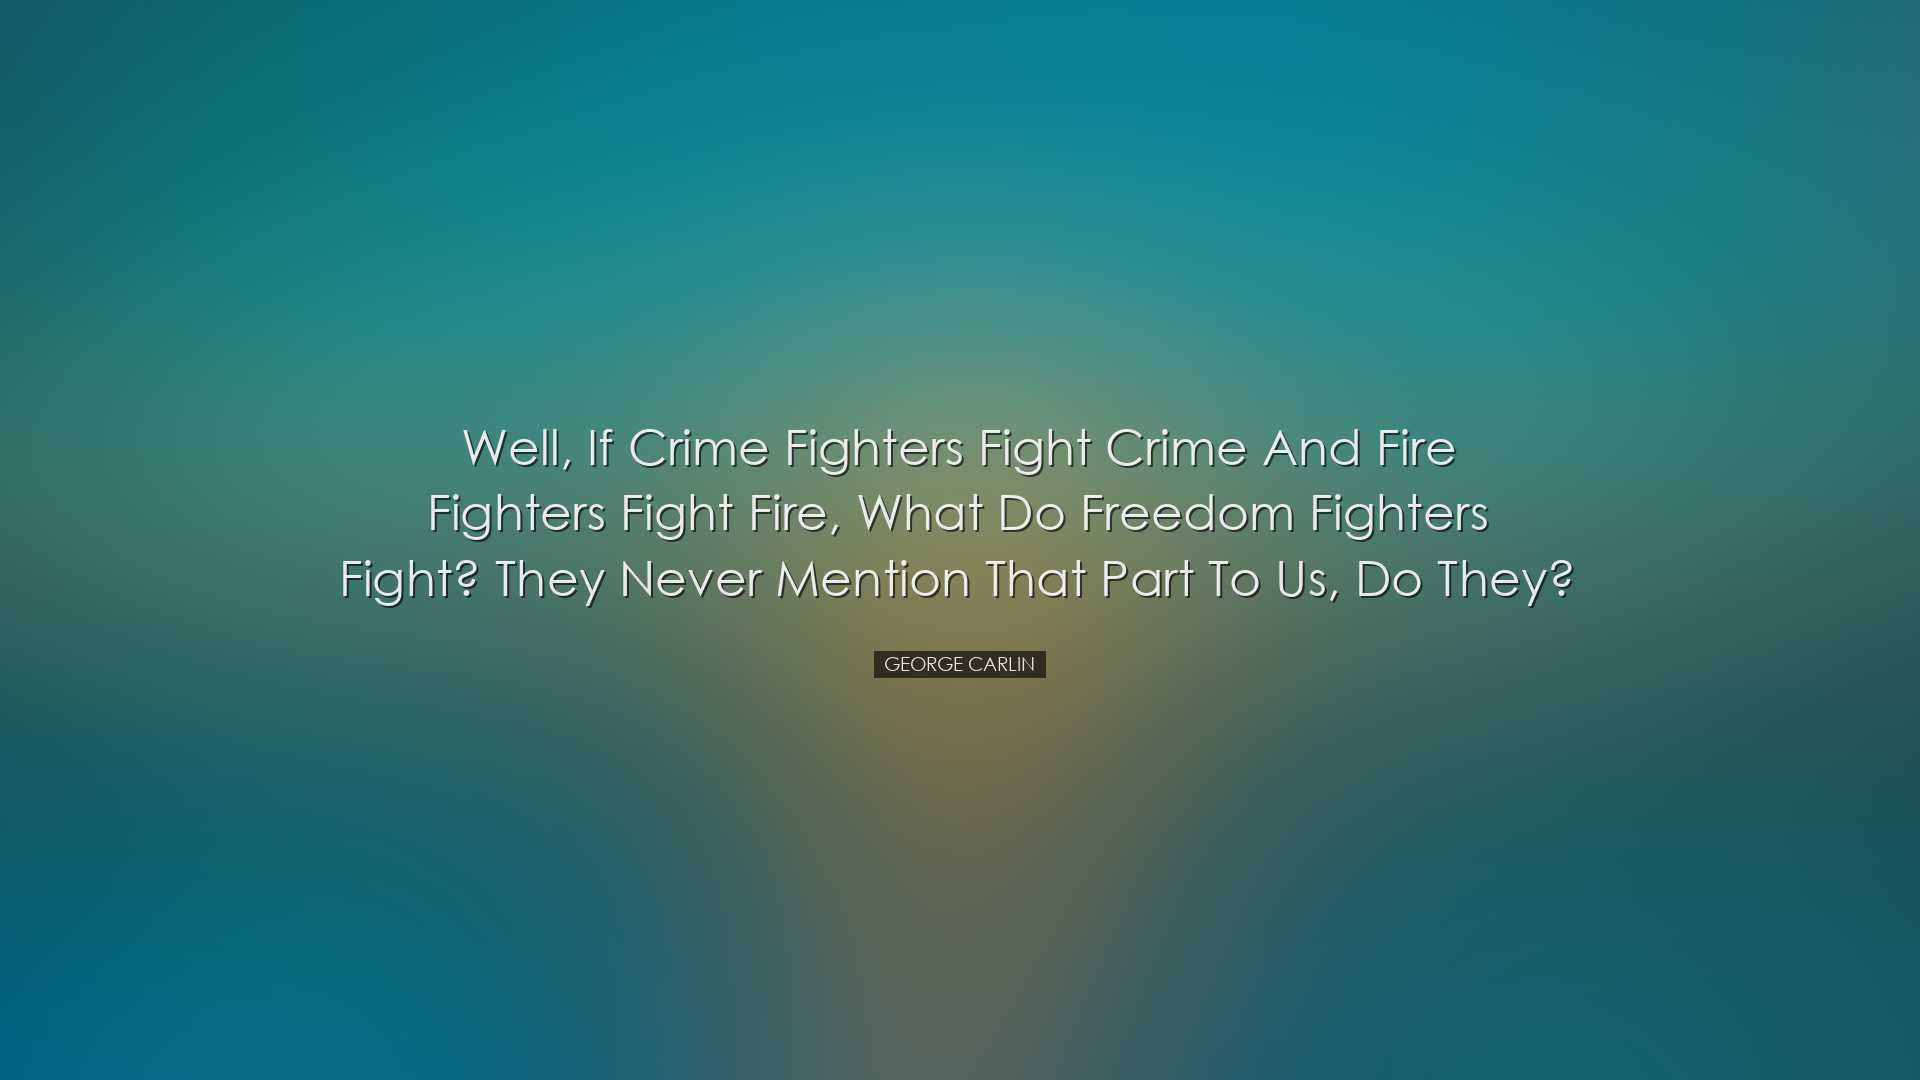 Well, if crime fighters fight crime and fire fighters fight fire,